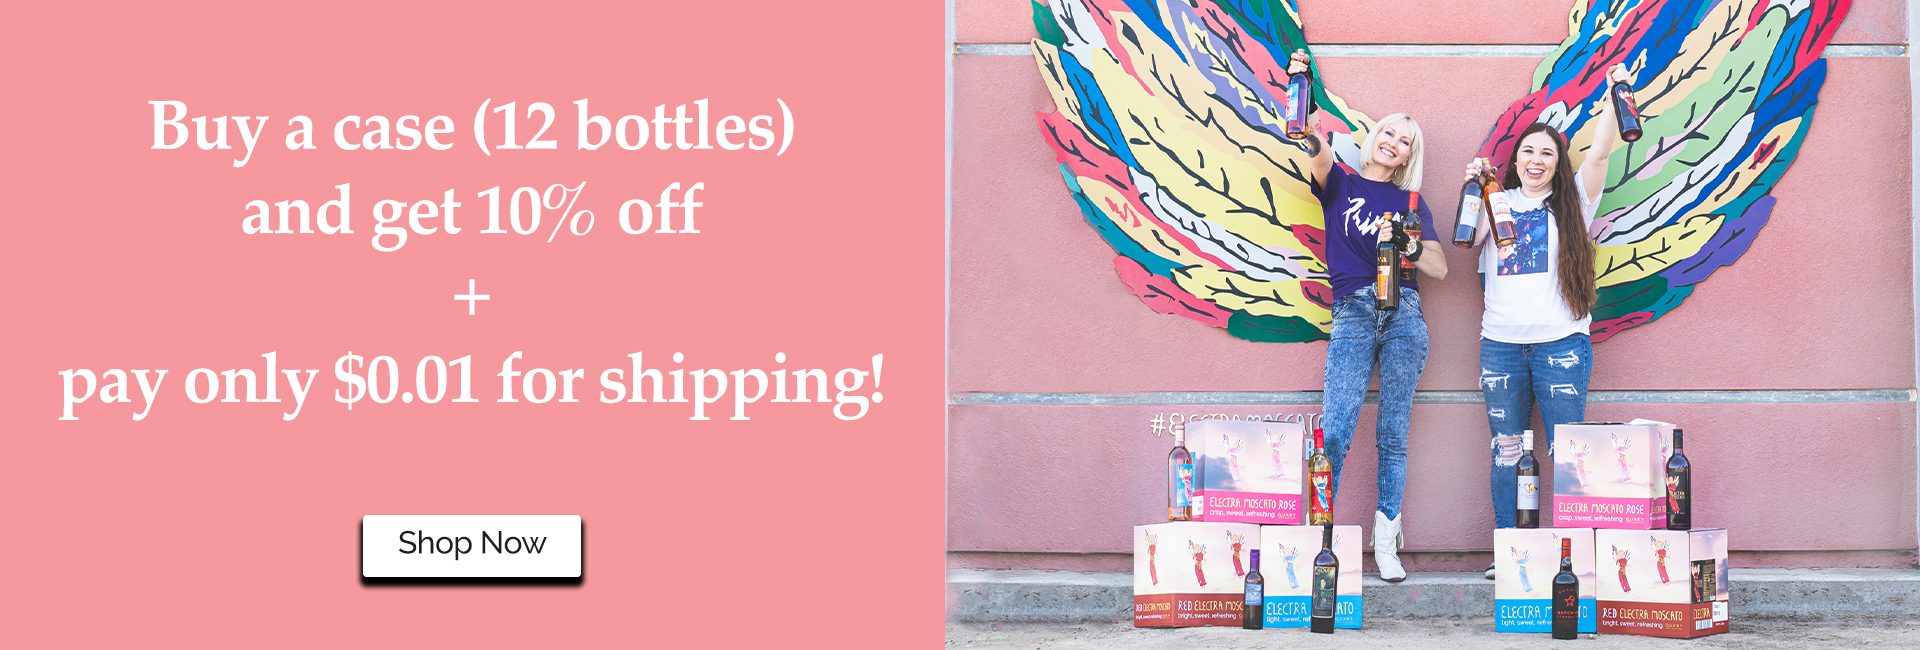 Buy case (12 bottles) and get 10% off plus pay only $0.01 for shipping. Shop now!